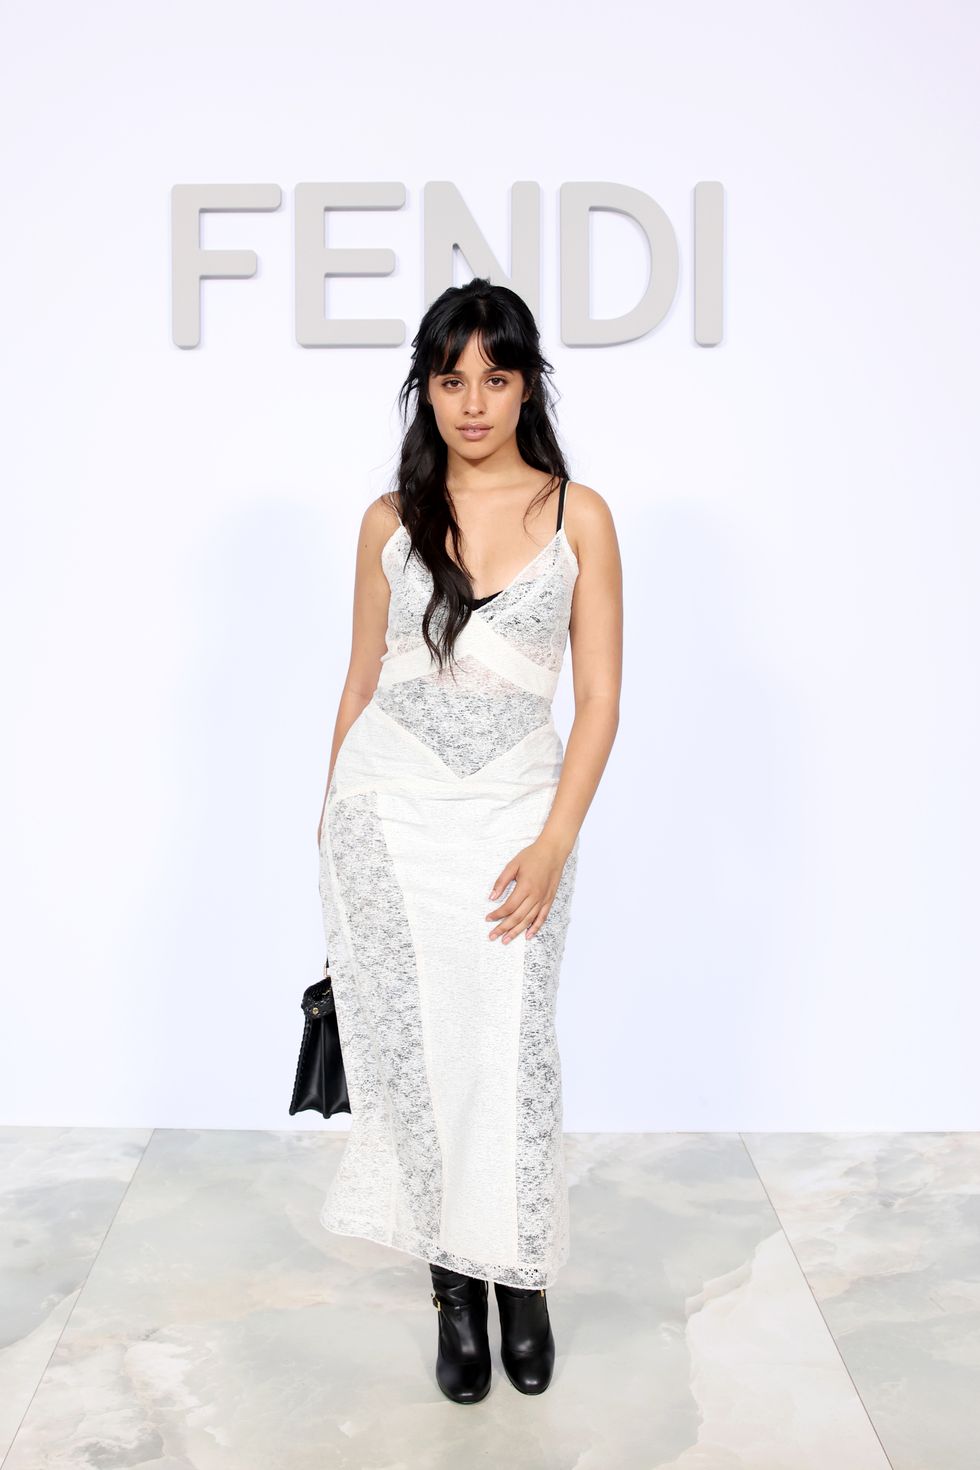 paris, france july 06 camila cabello attends the fendi couture fallwinter 20232024 show at palais brogniart on july 06, 2023 in paris, france photo by daniele venturelligetty images for fendi